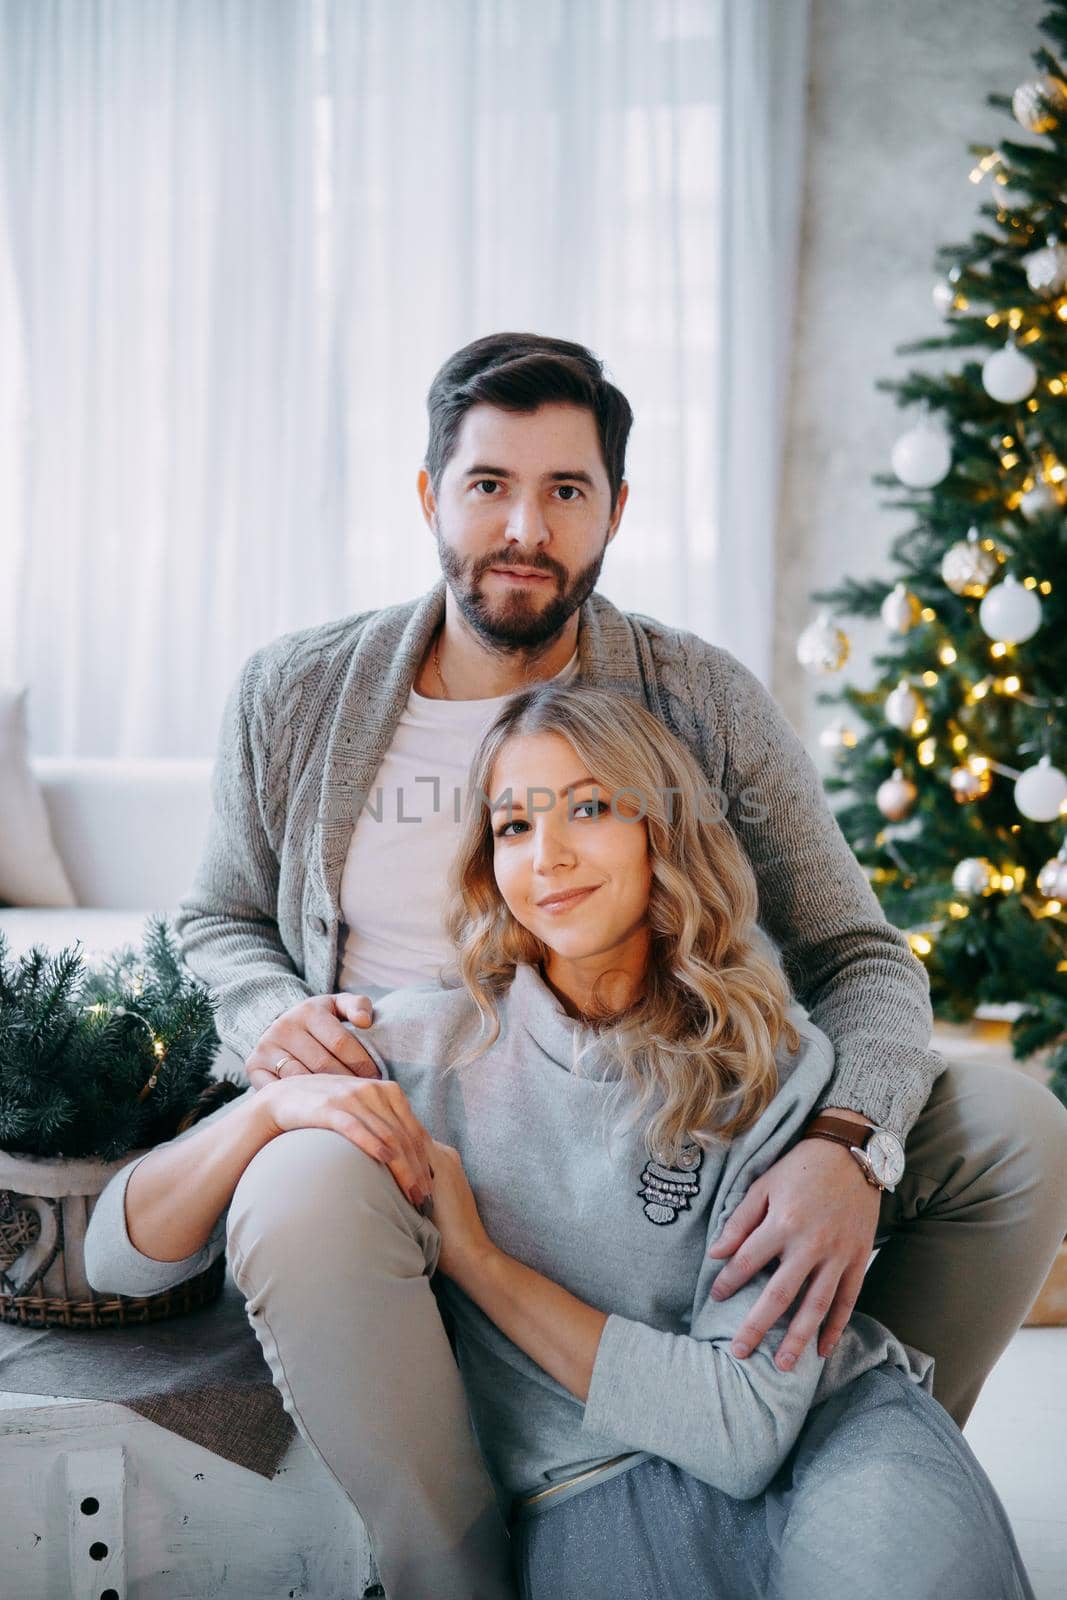 A happy couple in love - a man and a woman. A family in a bright New Year's interior with a Christmas tree. by Annu1tochka